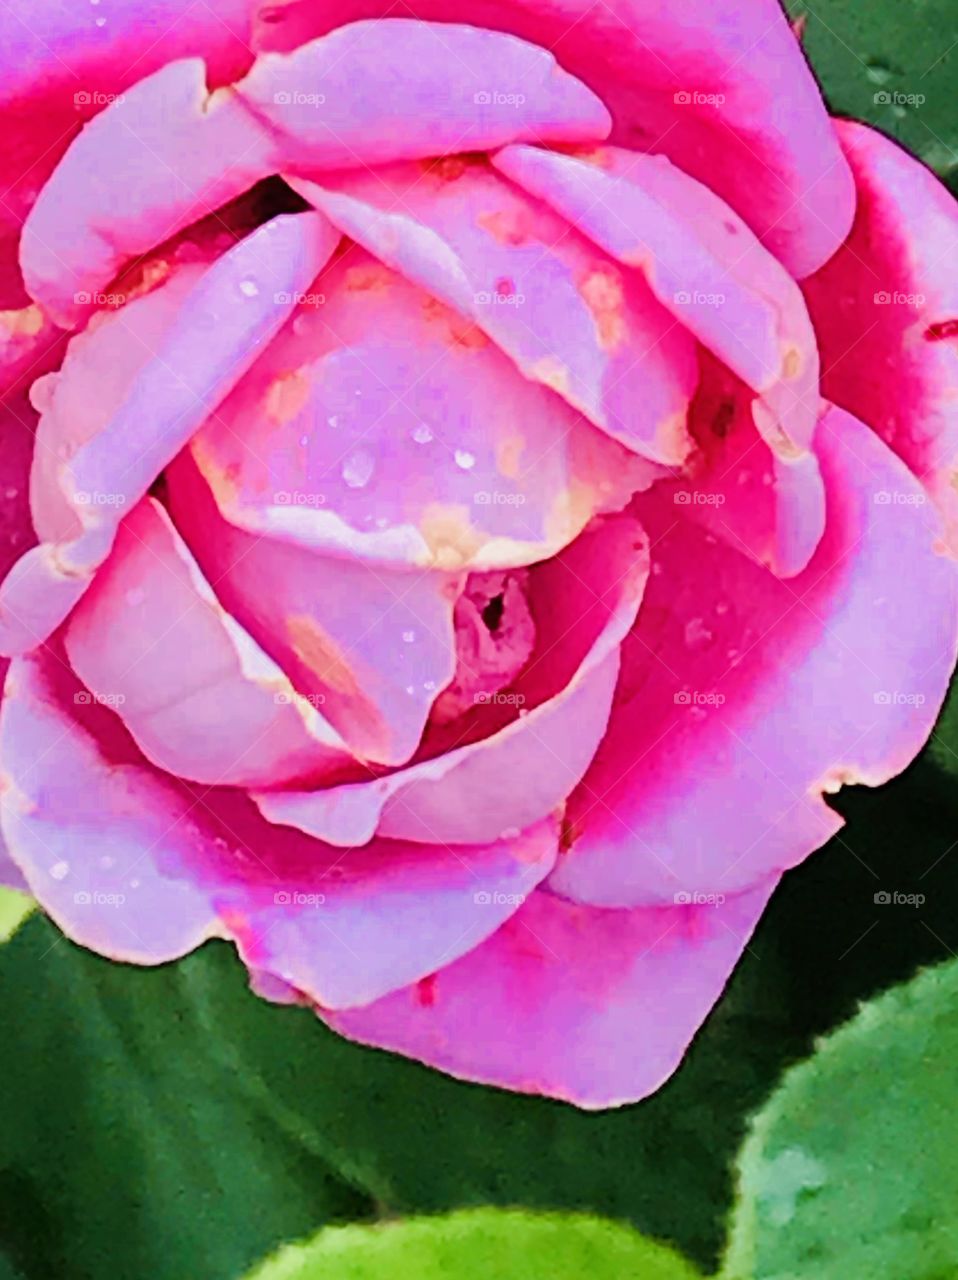 Watery Rose